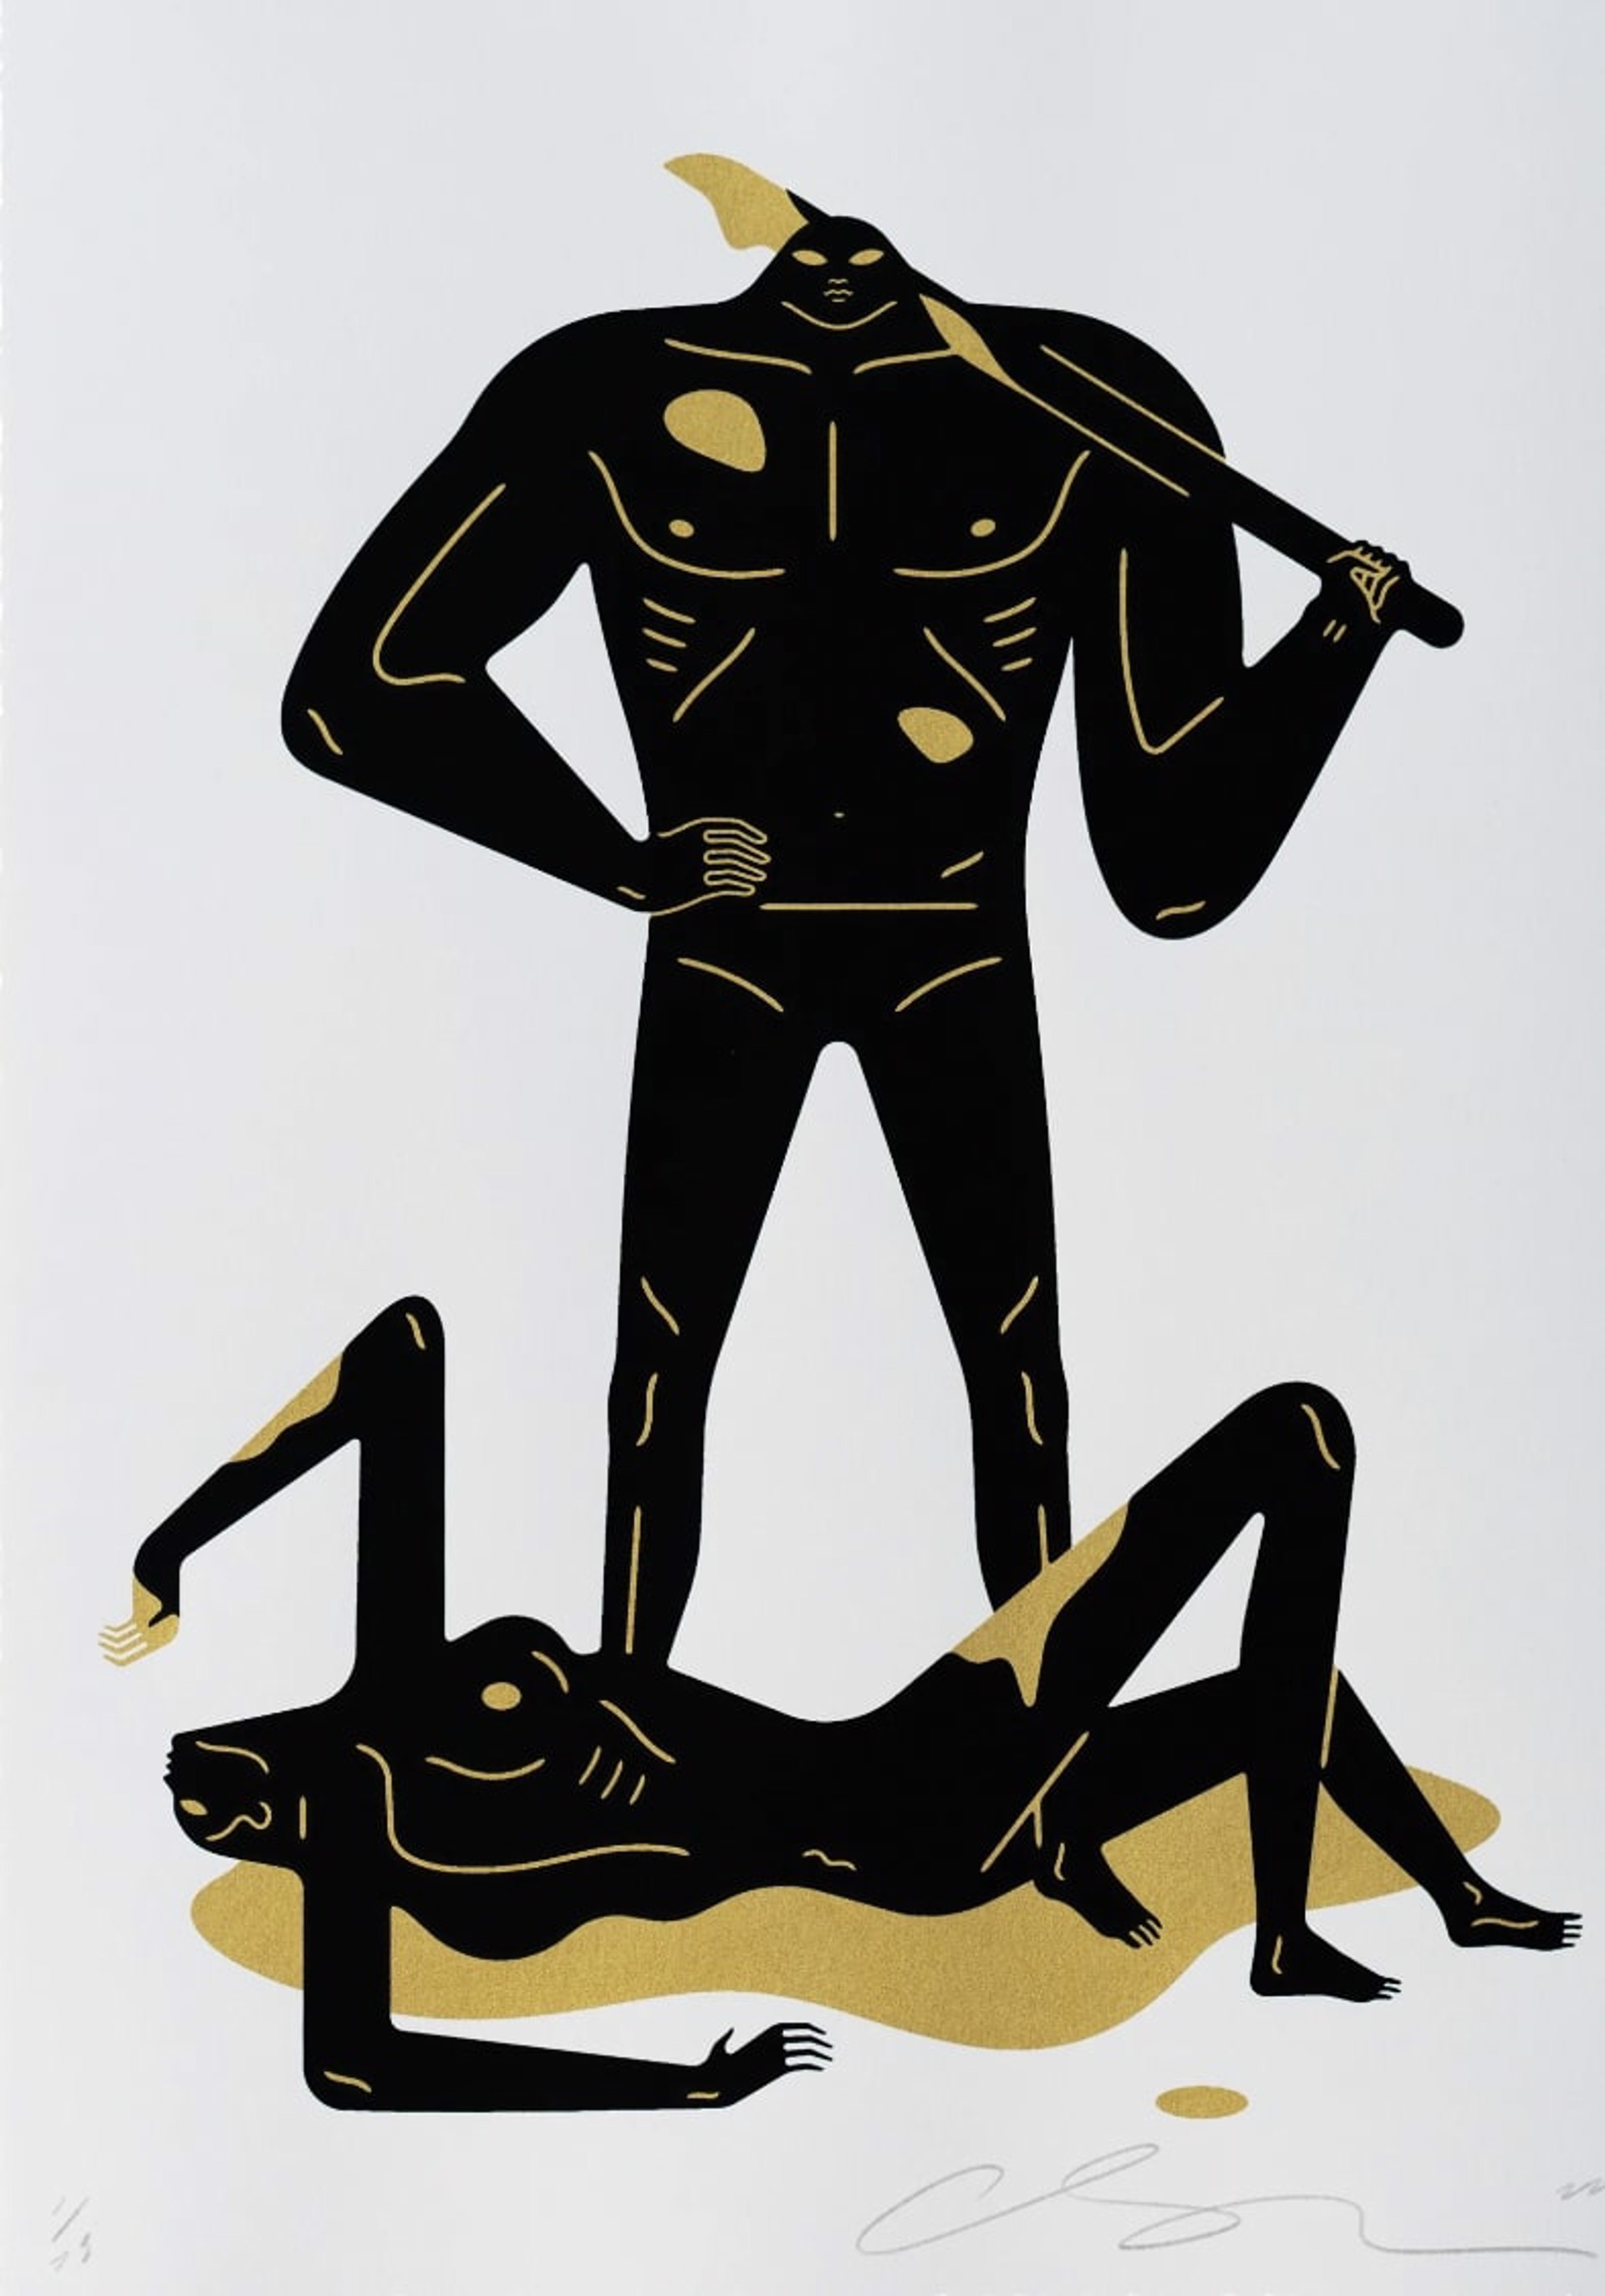 THE NAKED WOMAN & MAN (WHITE) by Cleon Peterson